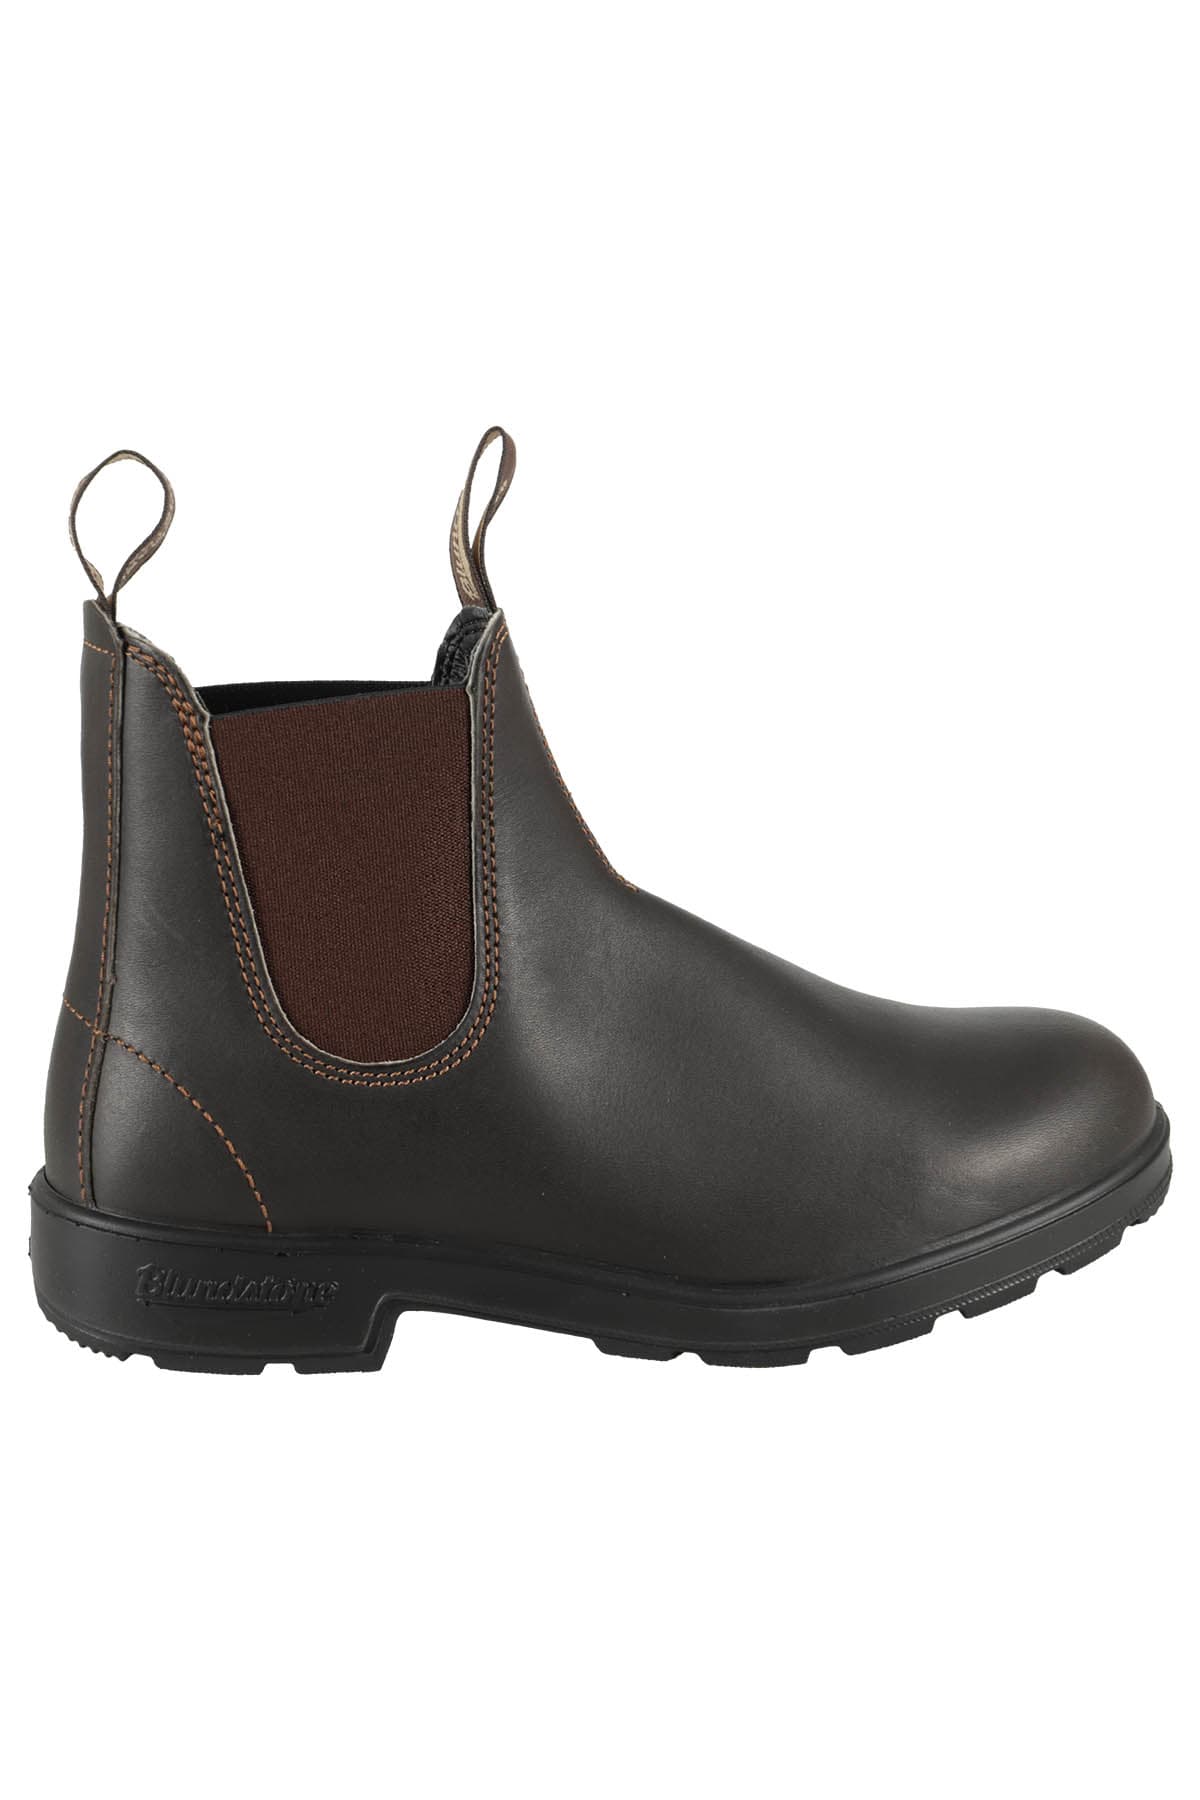 Shop Blundstone 500 In Stout Brown